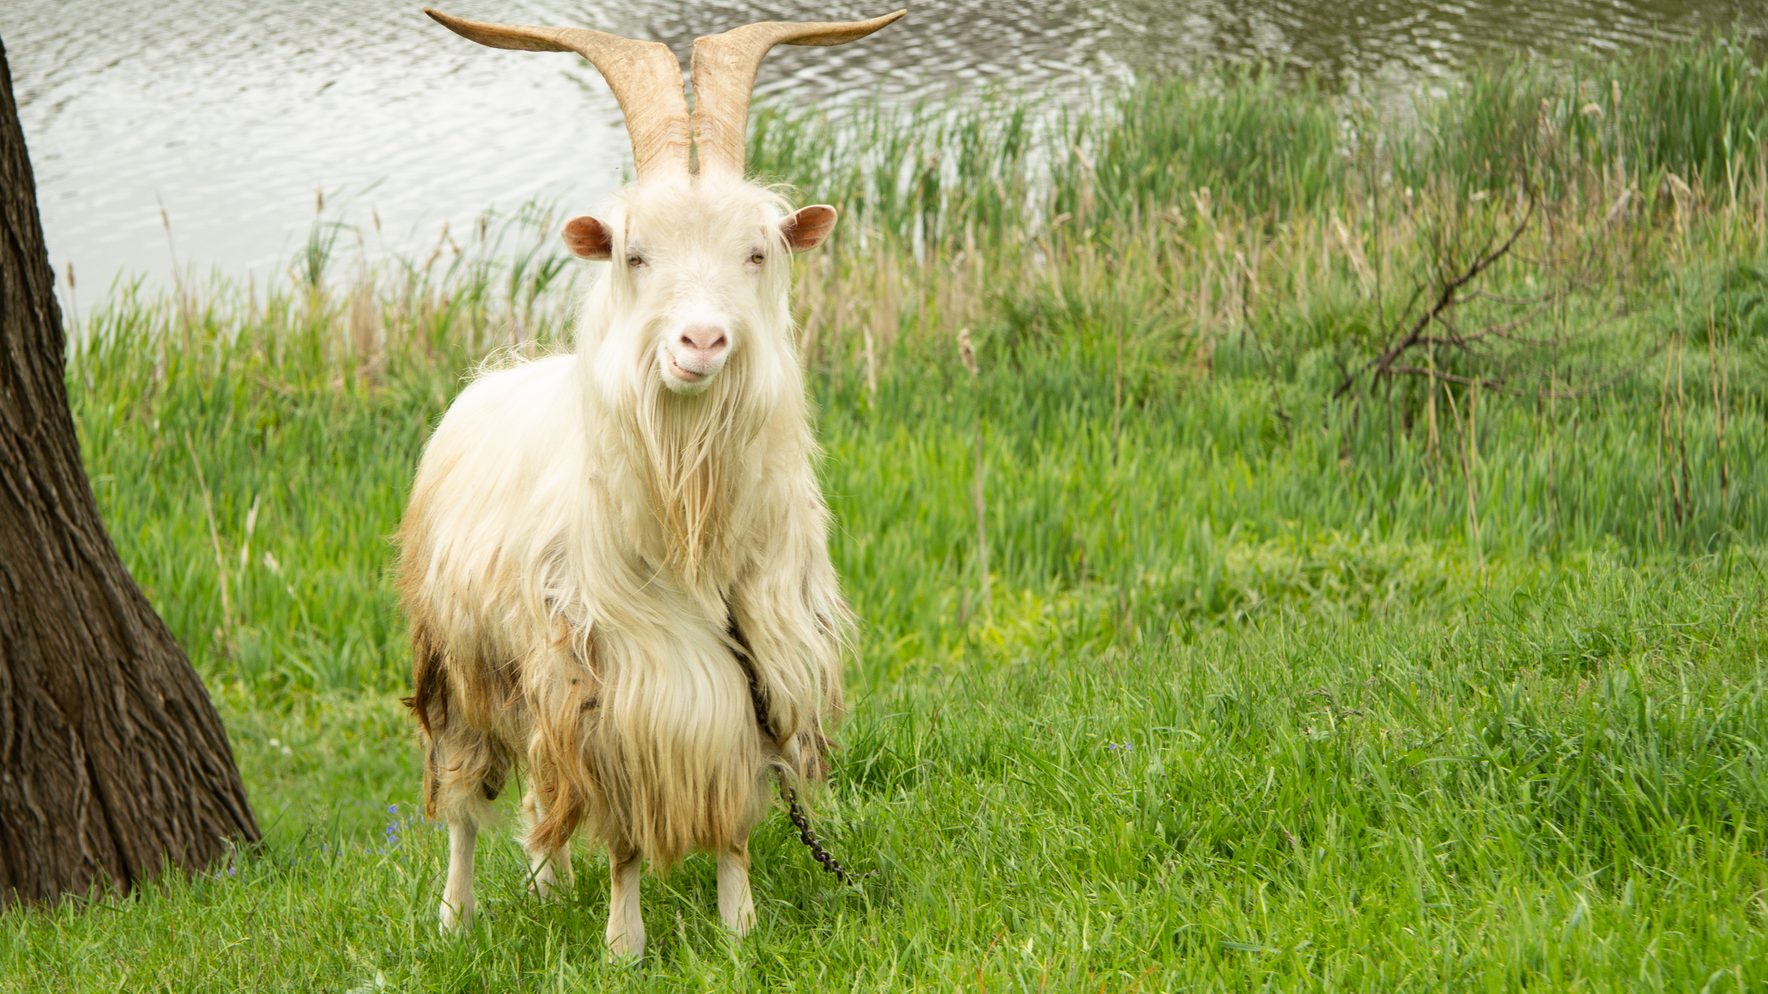 Dirty matted long haired goat with horns